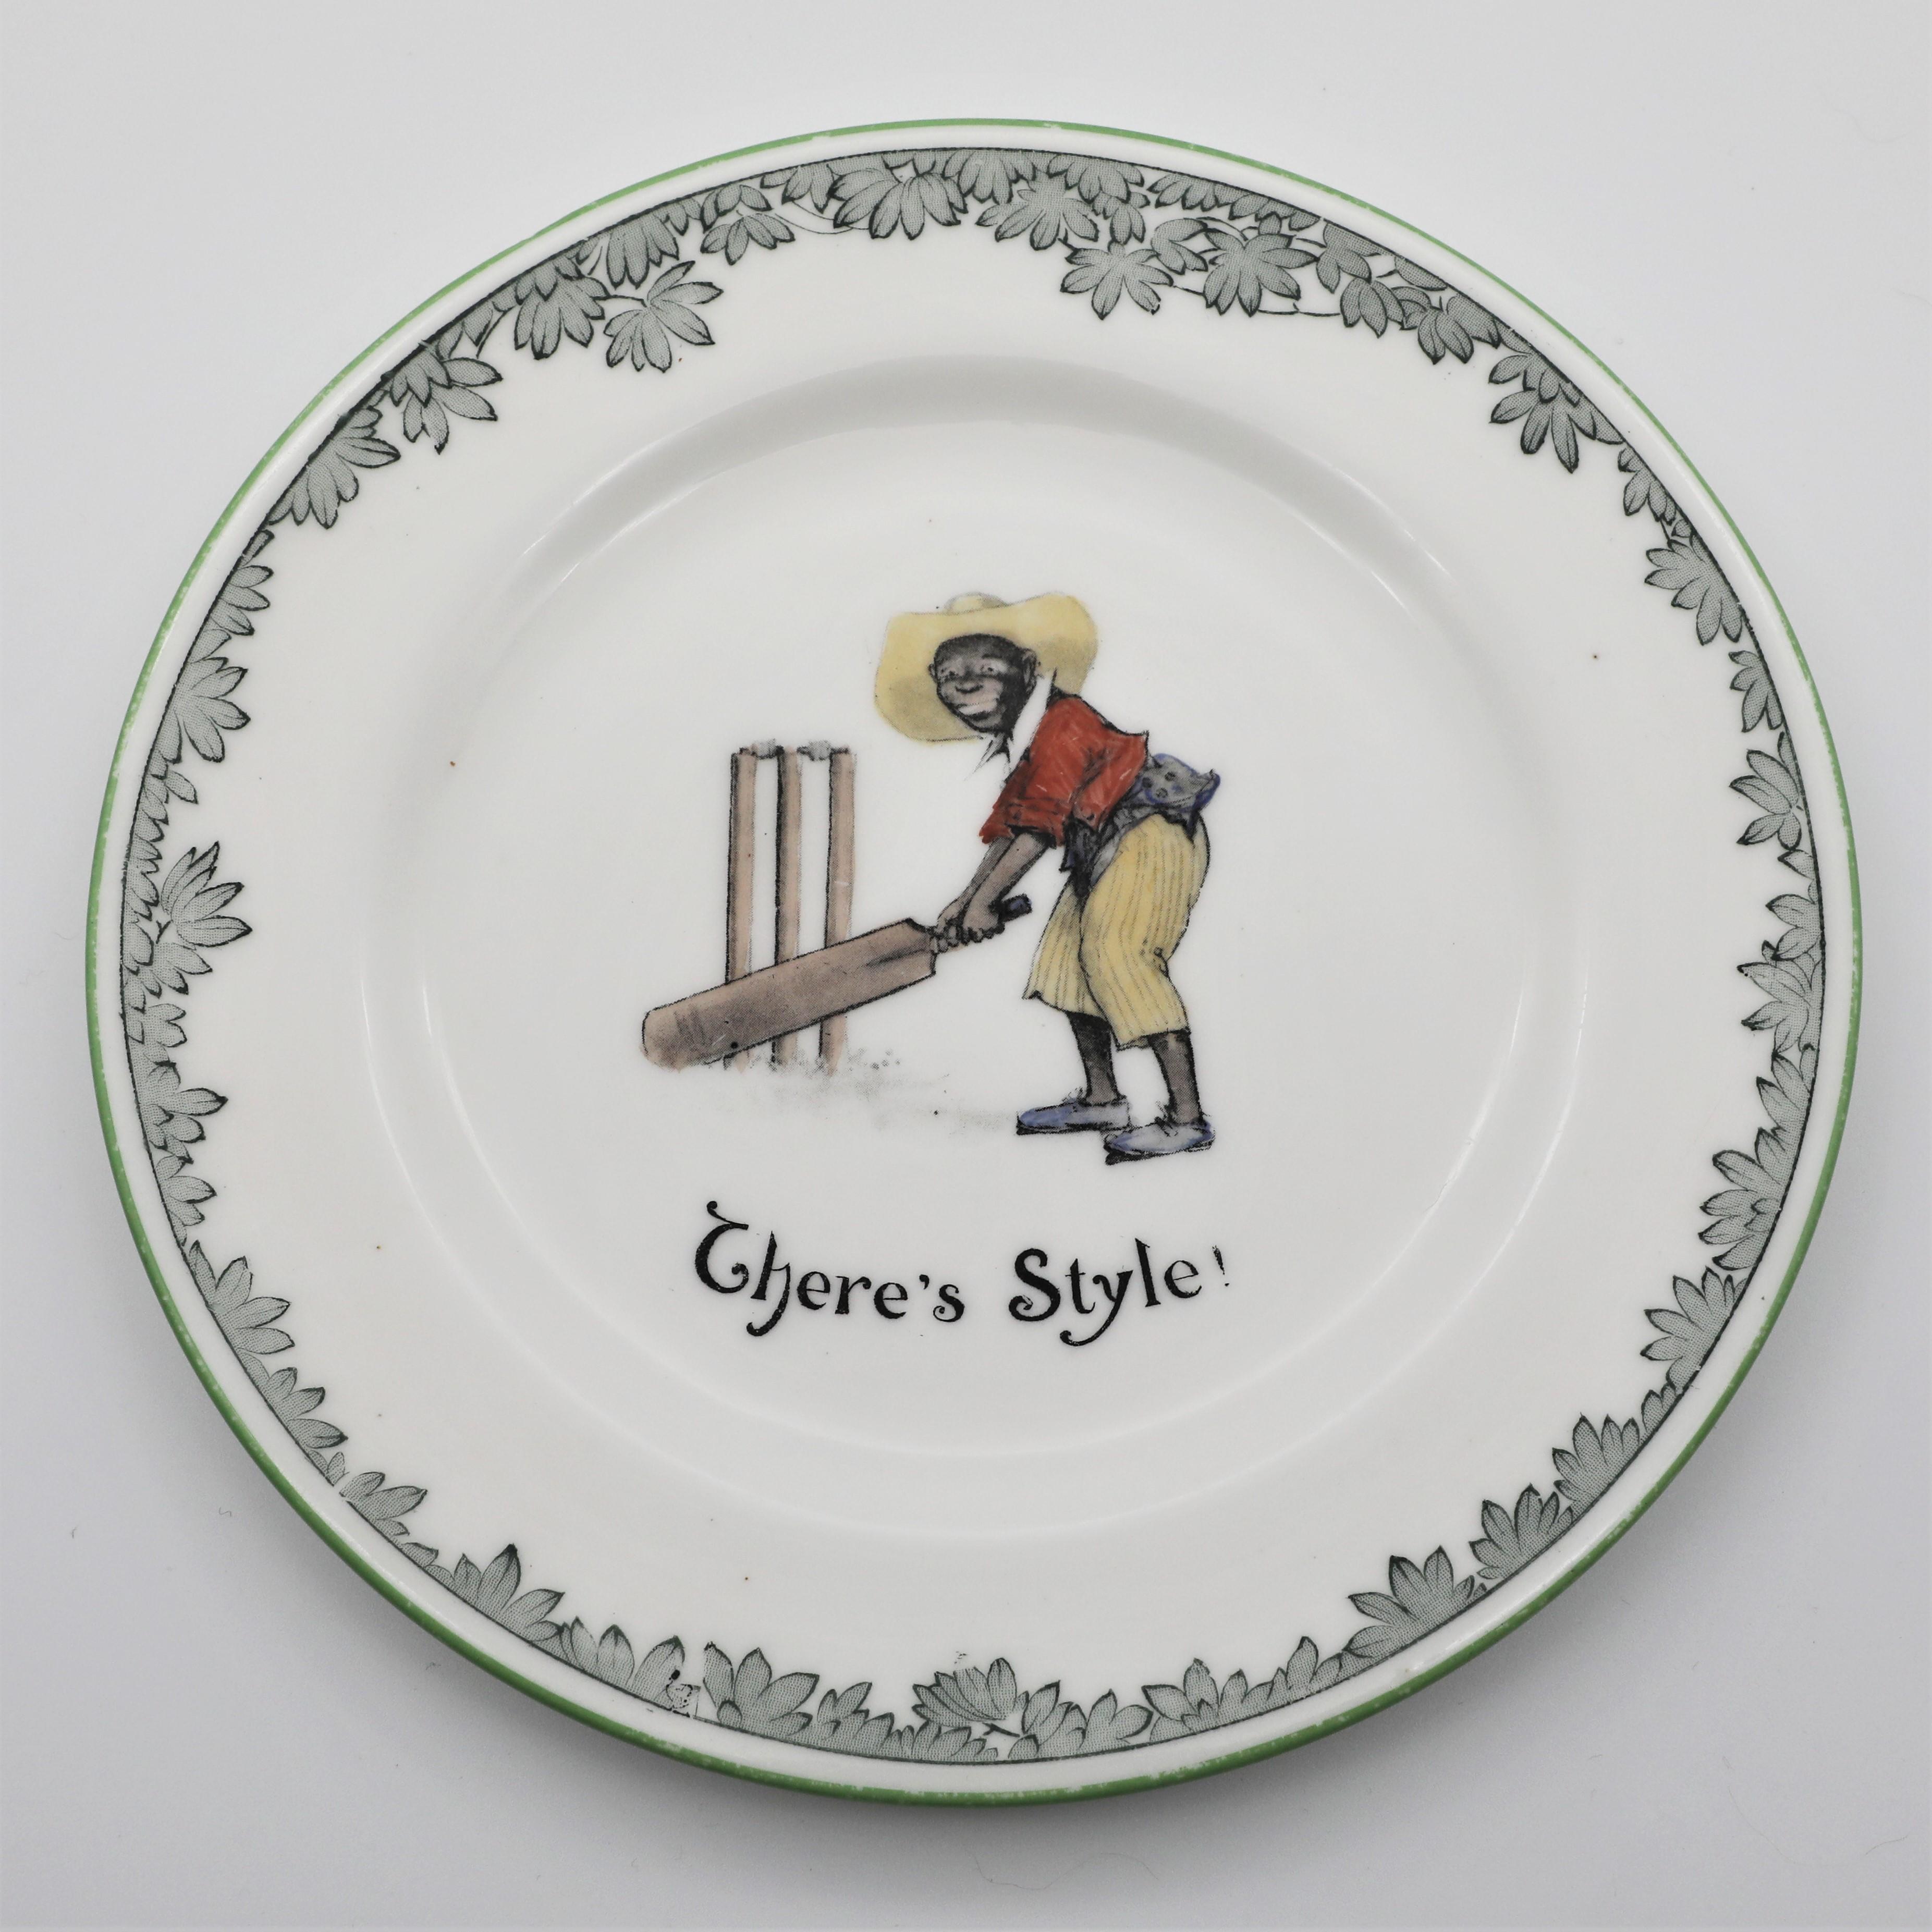 Royal Doulton "There's Style" Side Plate from "The All Black Team" cricket series - front